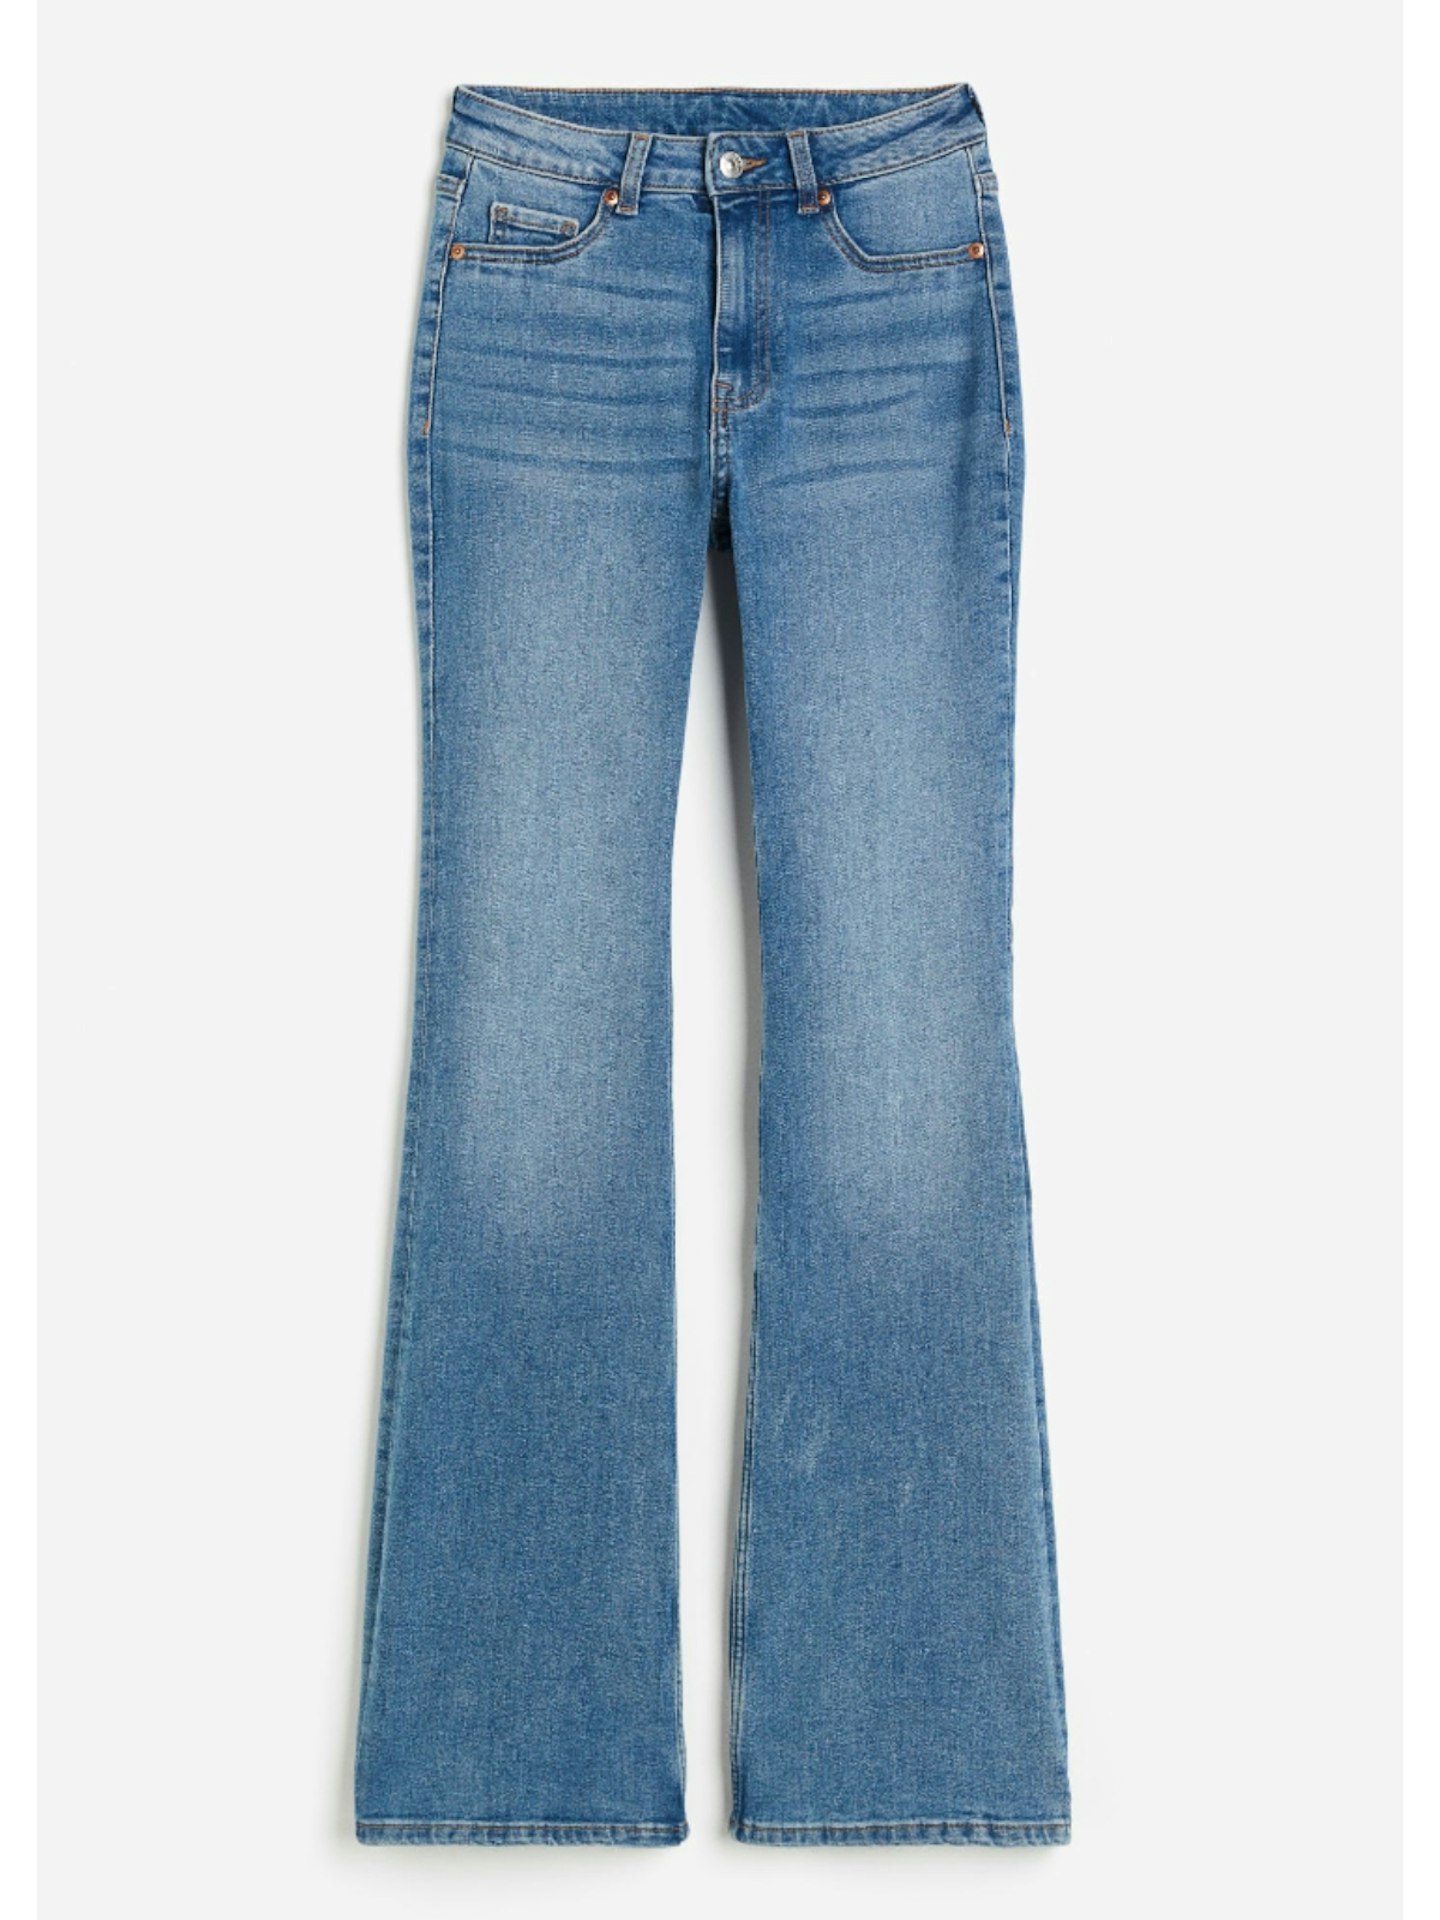 H&M, Flared High Jeans 